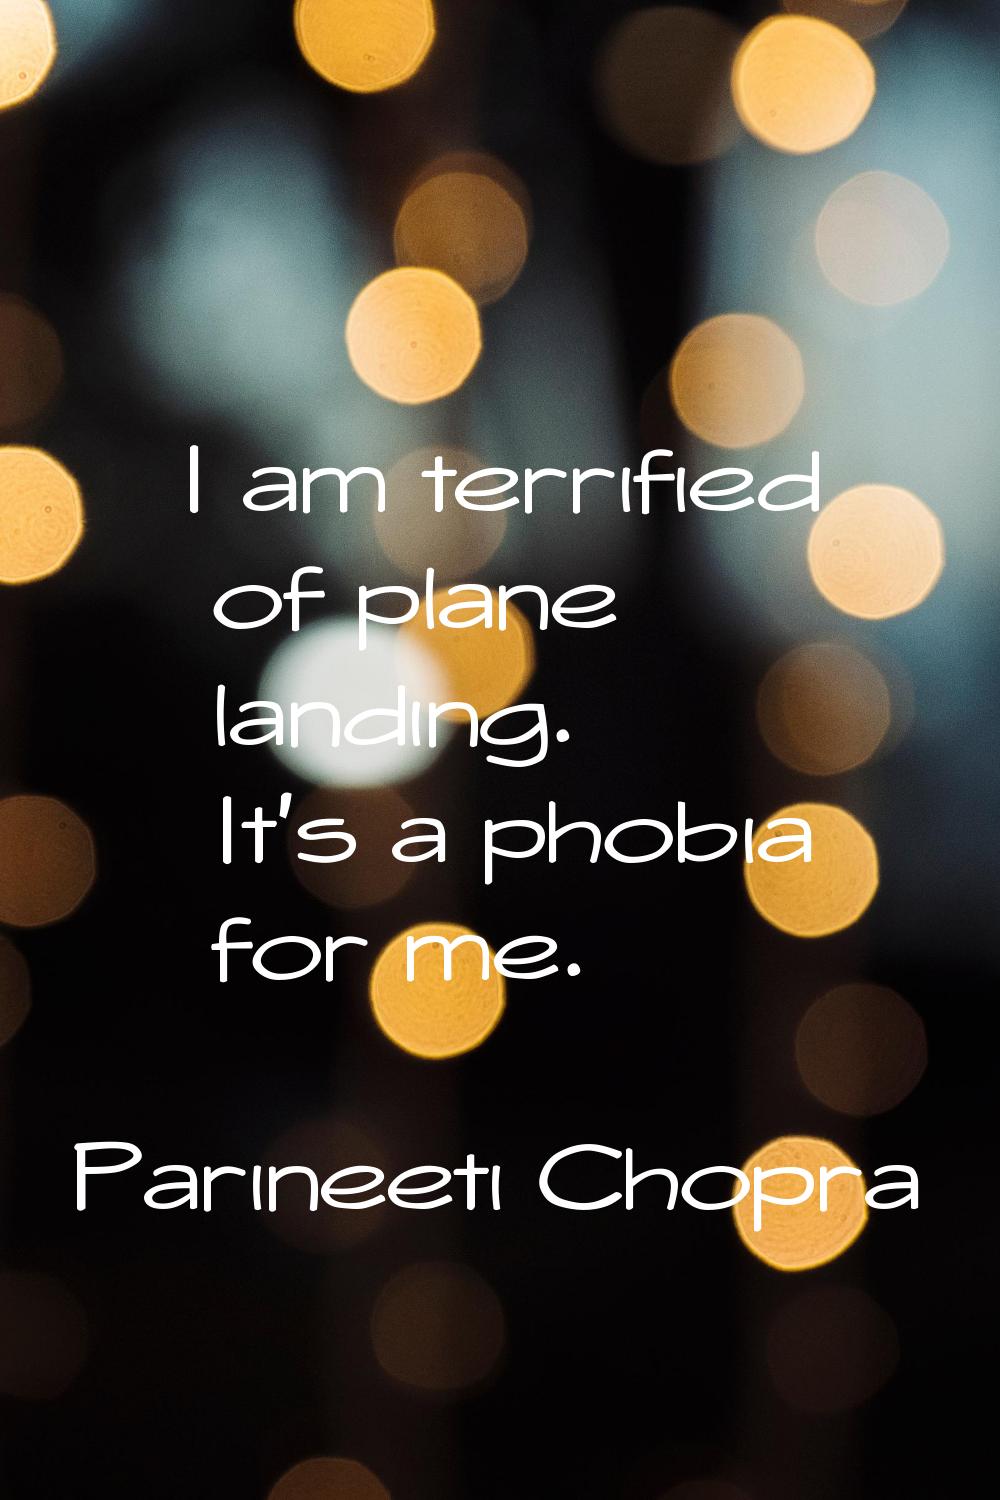 I am terrified of plane landing. It's a phobia for me.